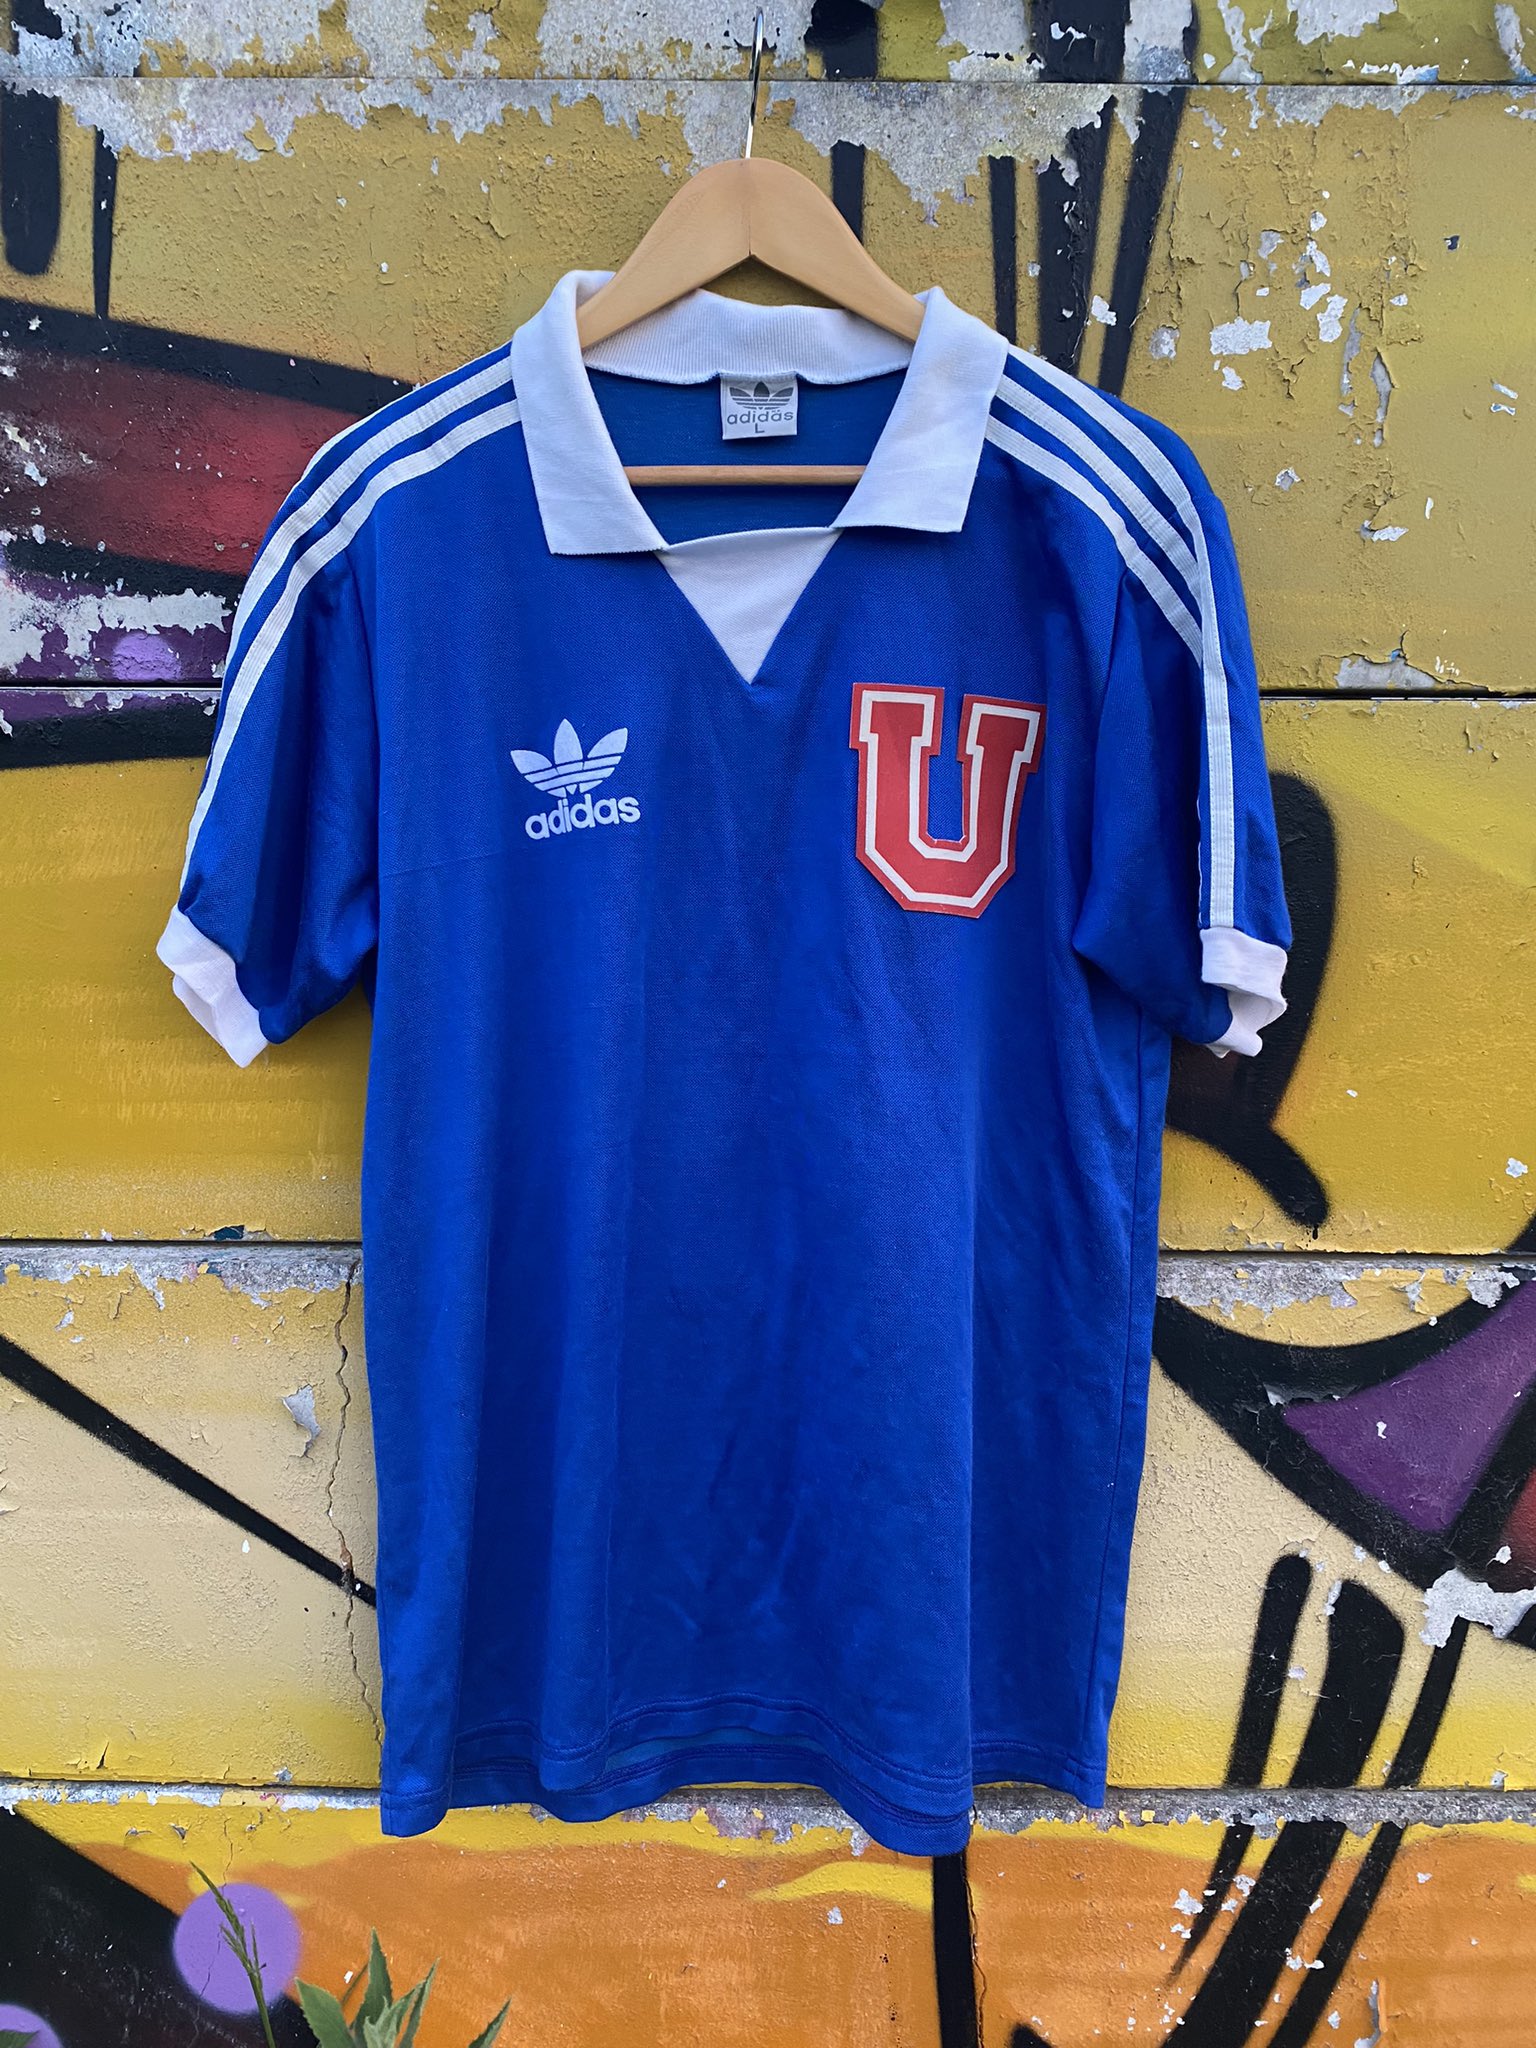 The Classic Trefoil on Twitter: "1988 @udechile home Managed by a youthful Manuel his month long hiatus to Europe to undertake coaching courses ultimately contributed to Los Azules' relegation from